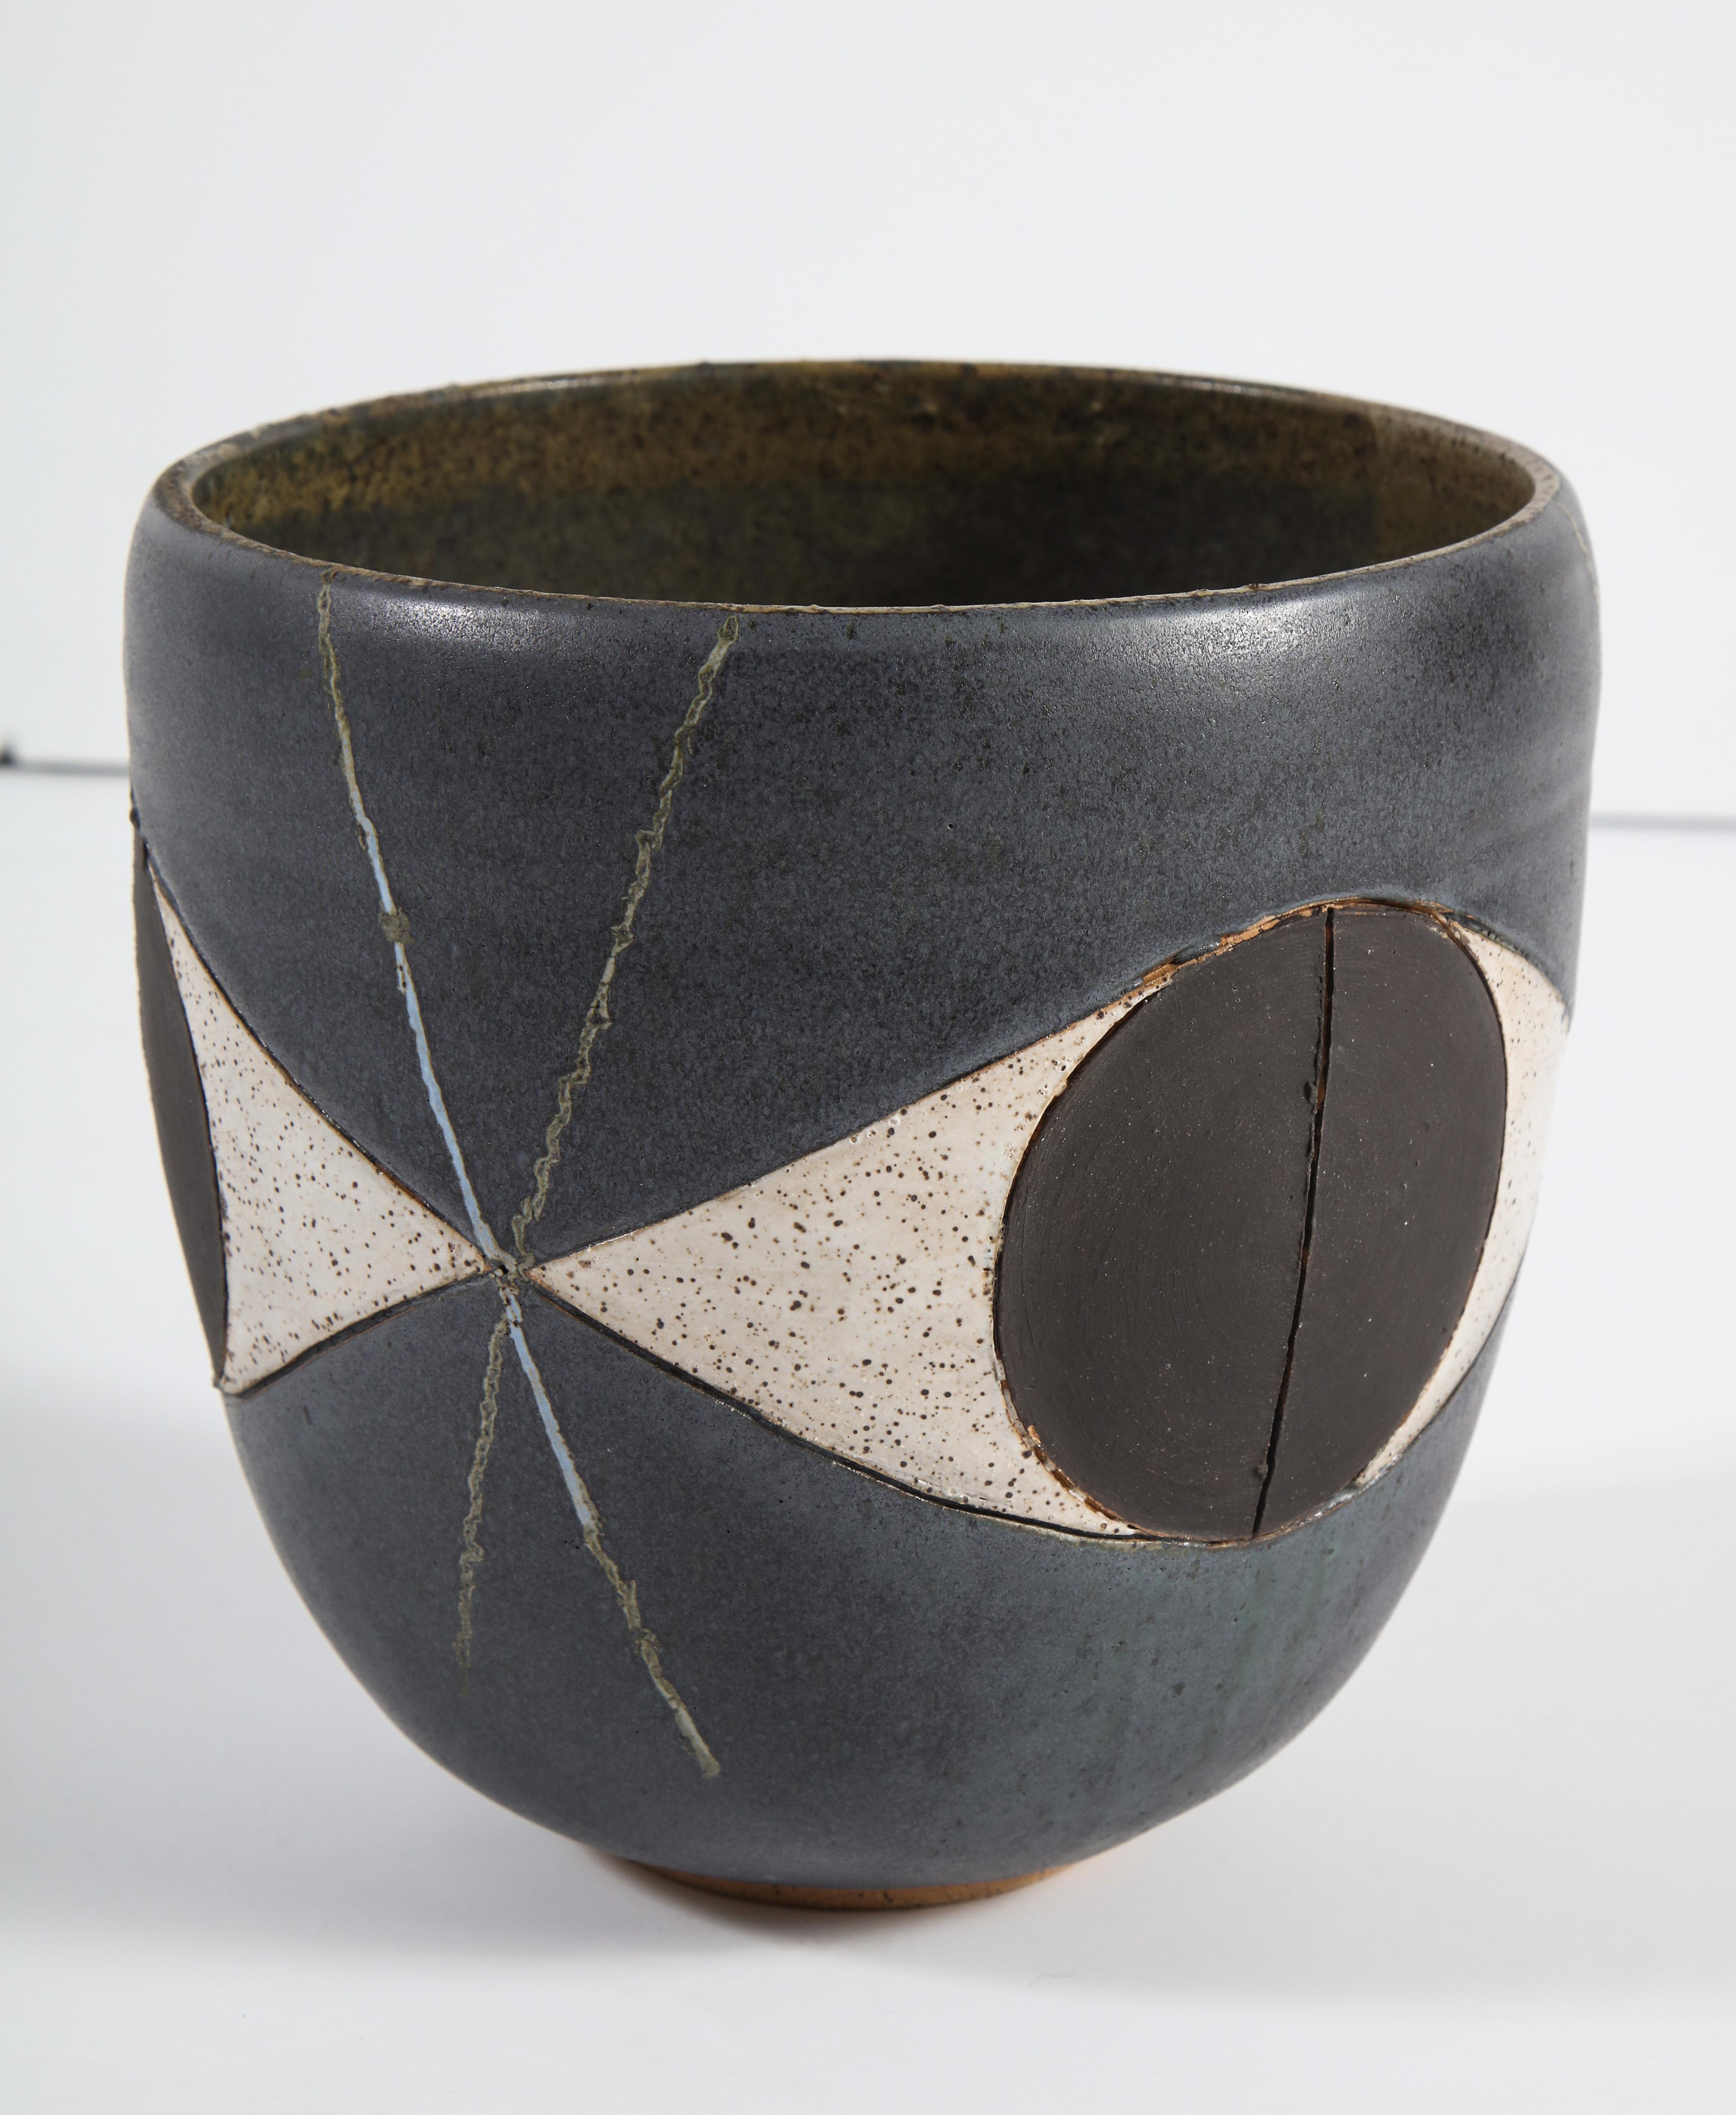 Matthew Ward is a graduate of the School of the Museum of Fine Arts in Boston. A self-taught ceramist, he draws inspiration from Post-War Studio Pottery as well as Art and Design from the midcentury. His work was included in the Clay Studio National